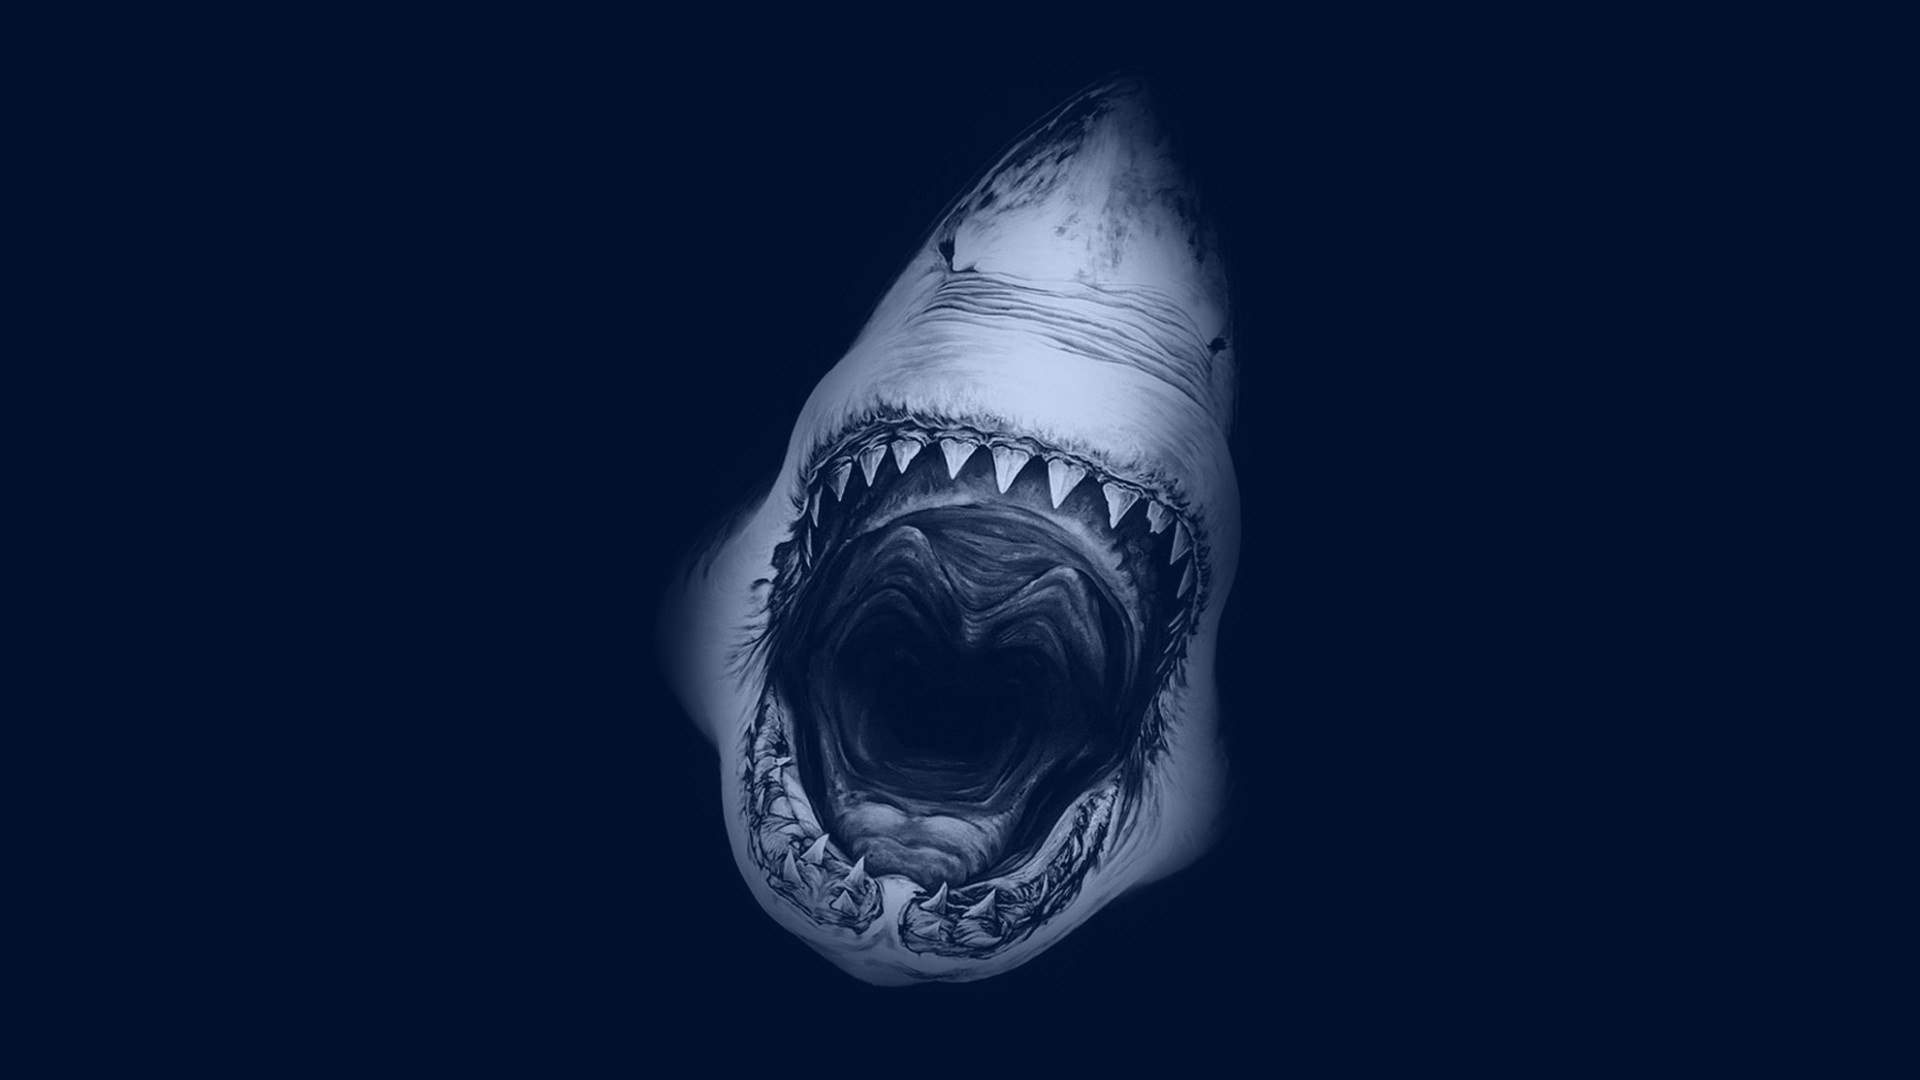 Deadly shark grin wallpapers and images - wallpapers, pictures, photos